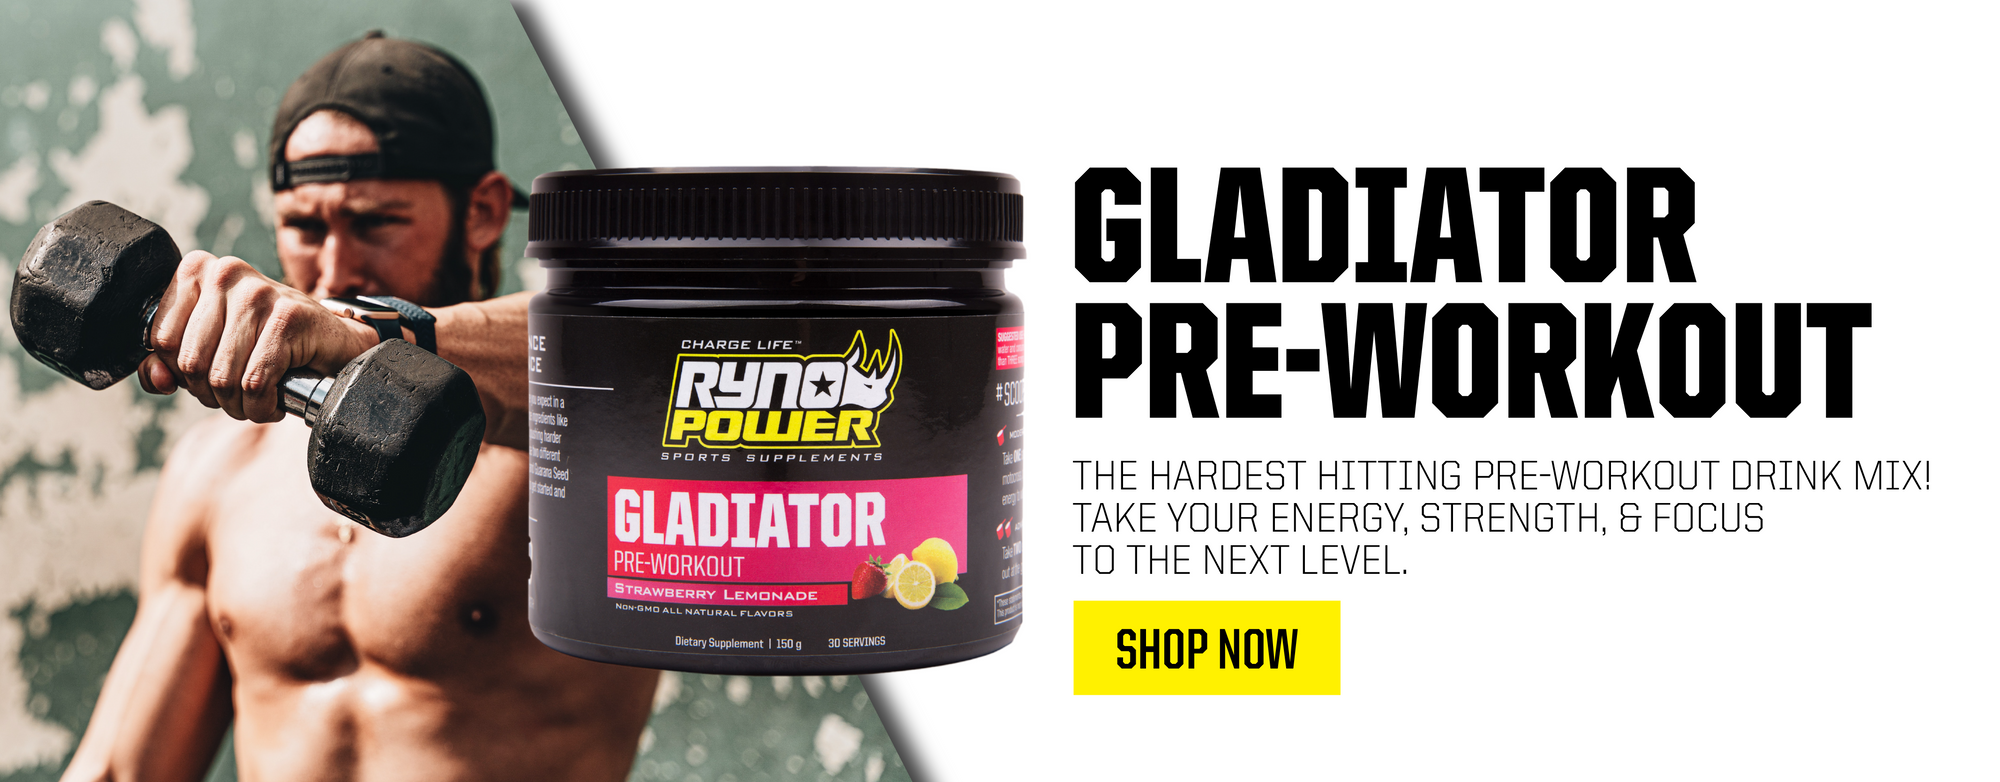 Gladiator pre-workout banner - person lifting weights with product showcased